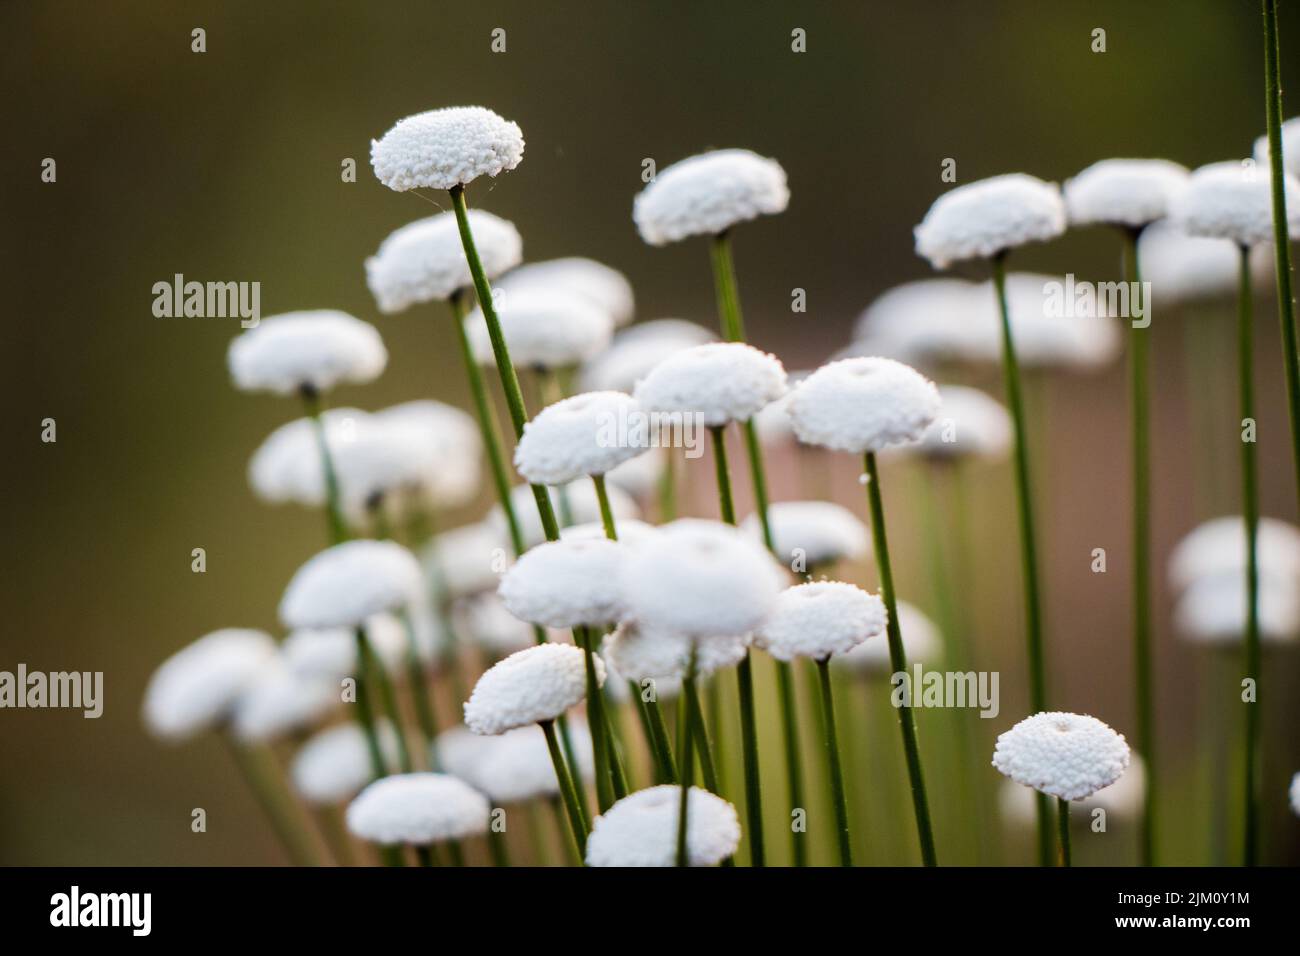 A closeup of a white Eriocaulon decangulare flowers growing against a blurry green background Stock Photo